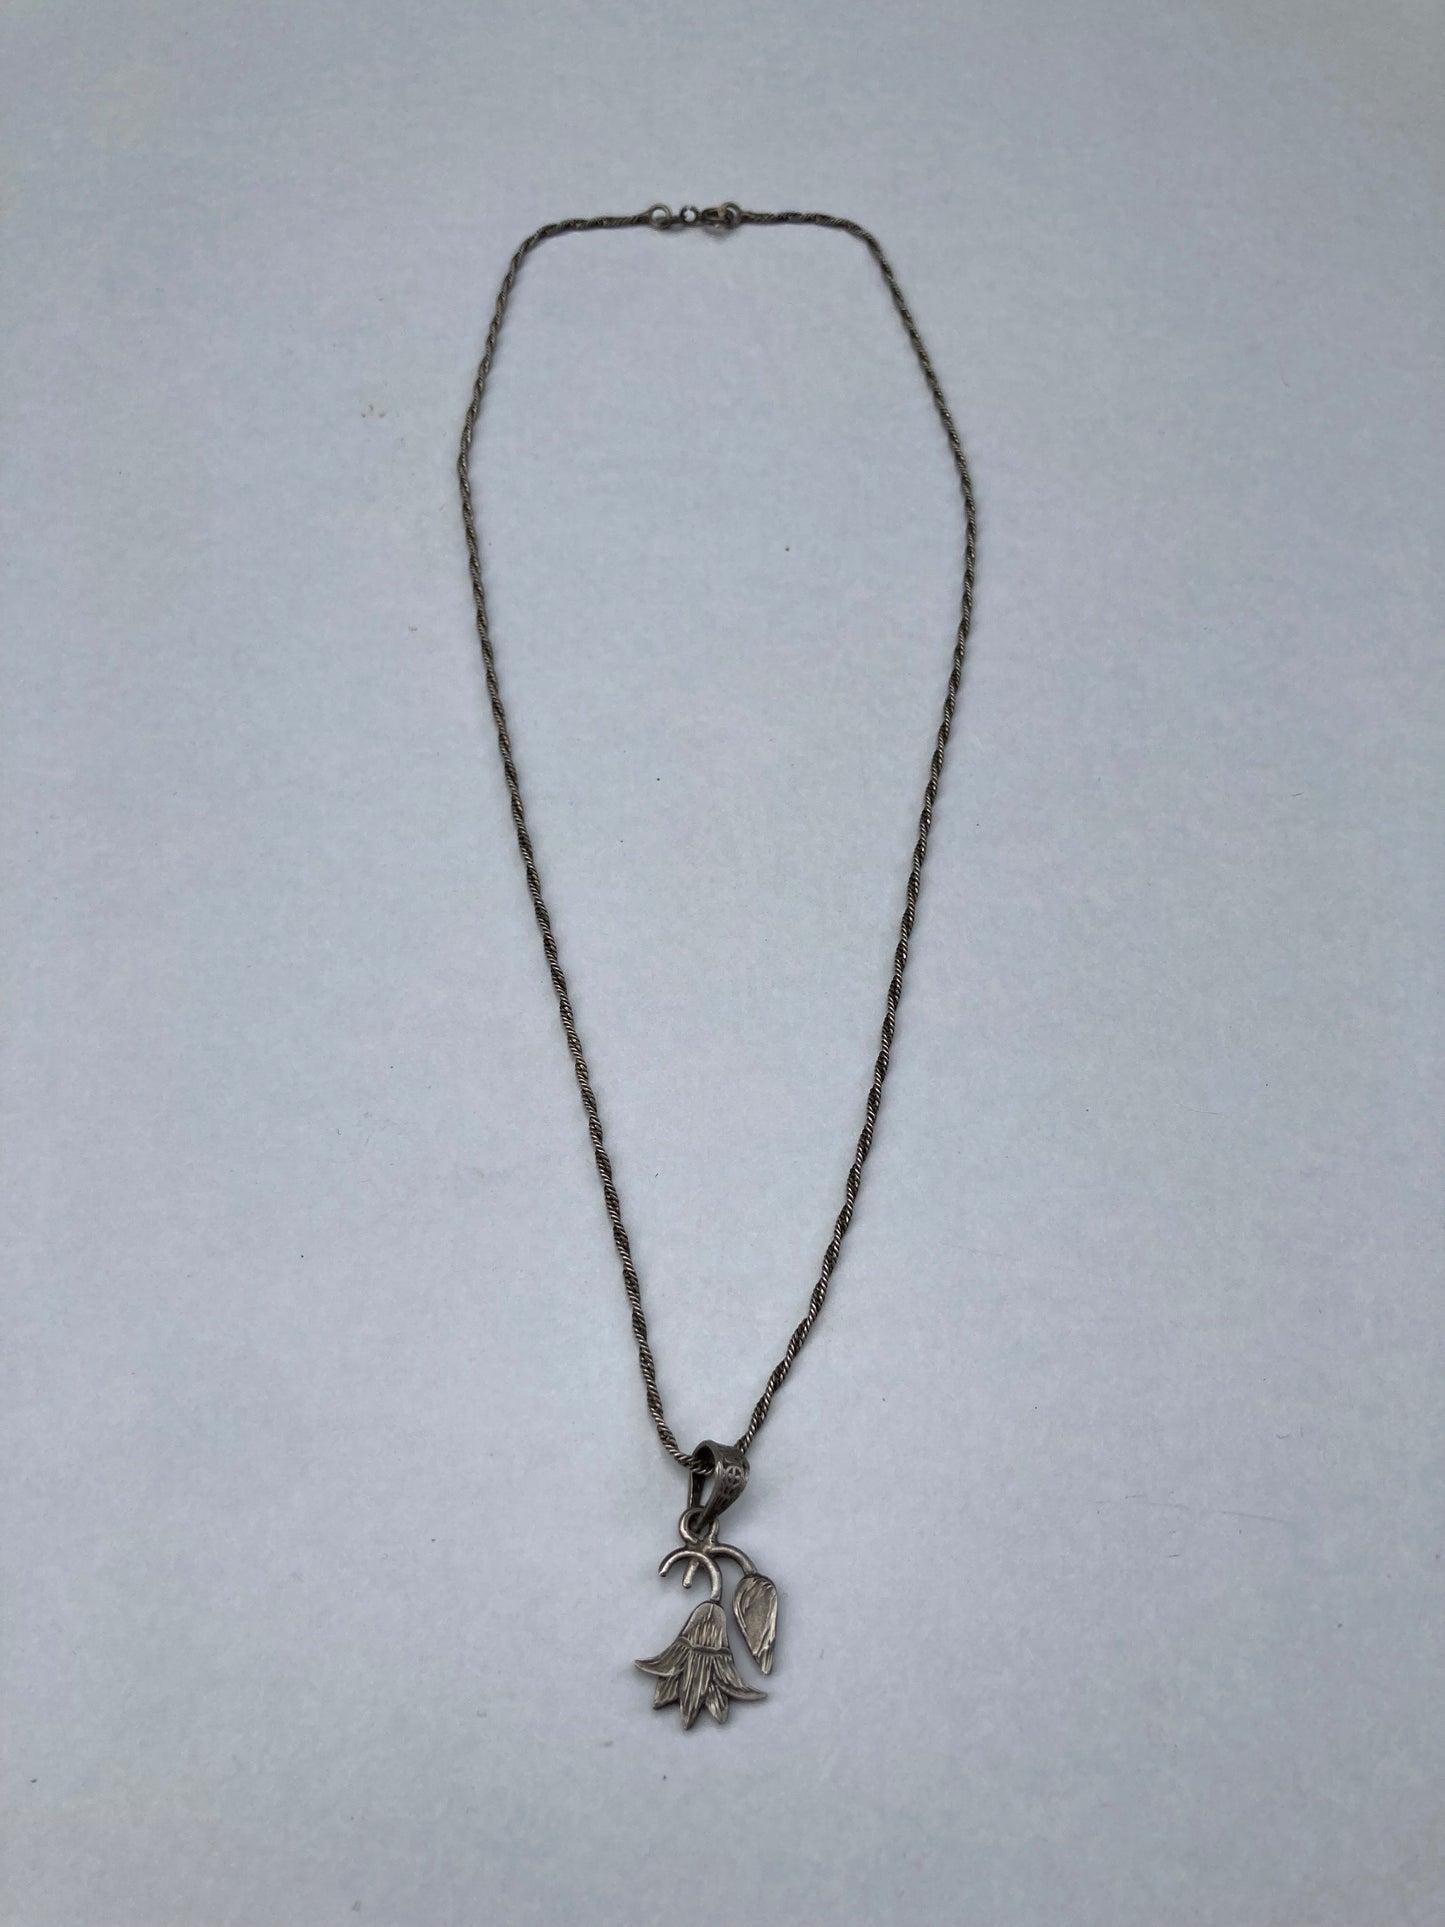 Silver Lotus Flower Pendant Twisted Necklace Vintage